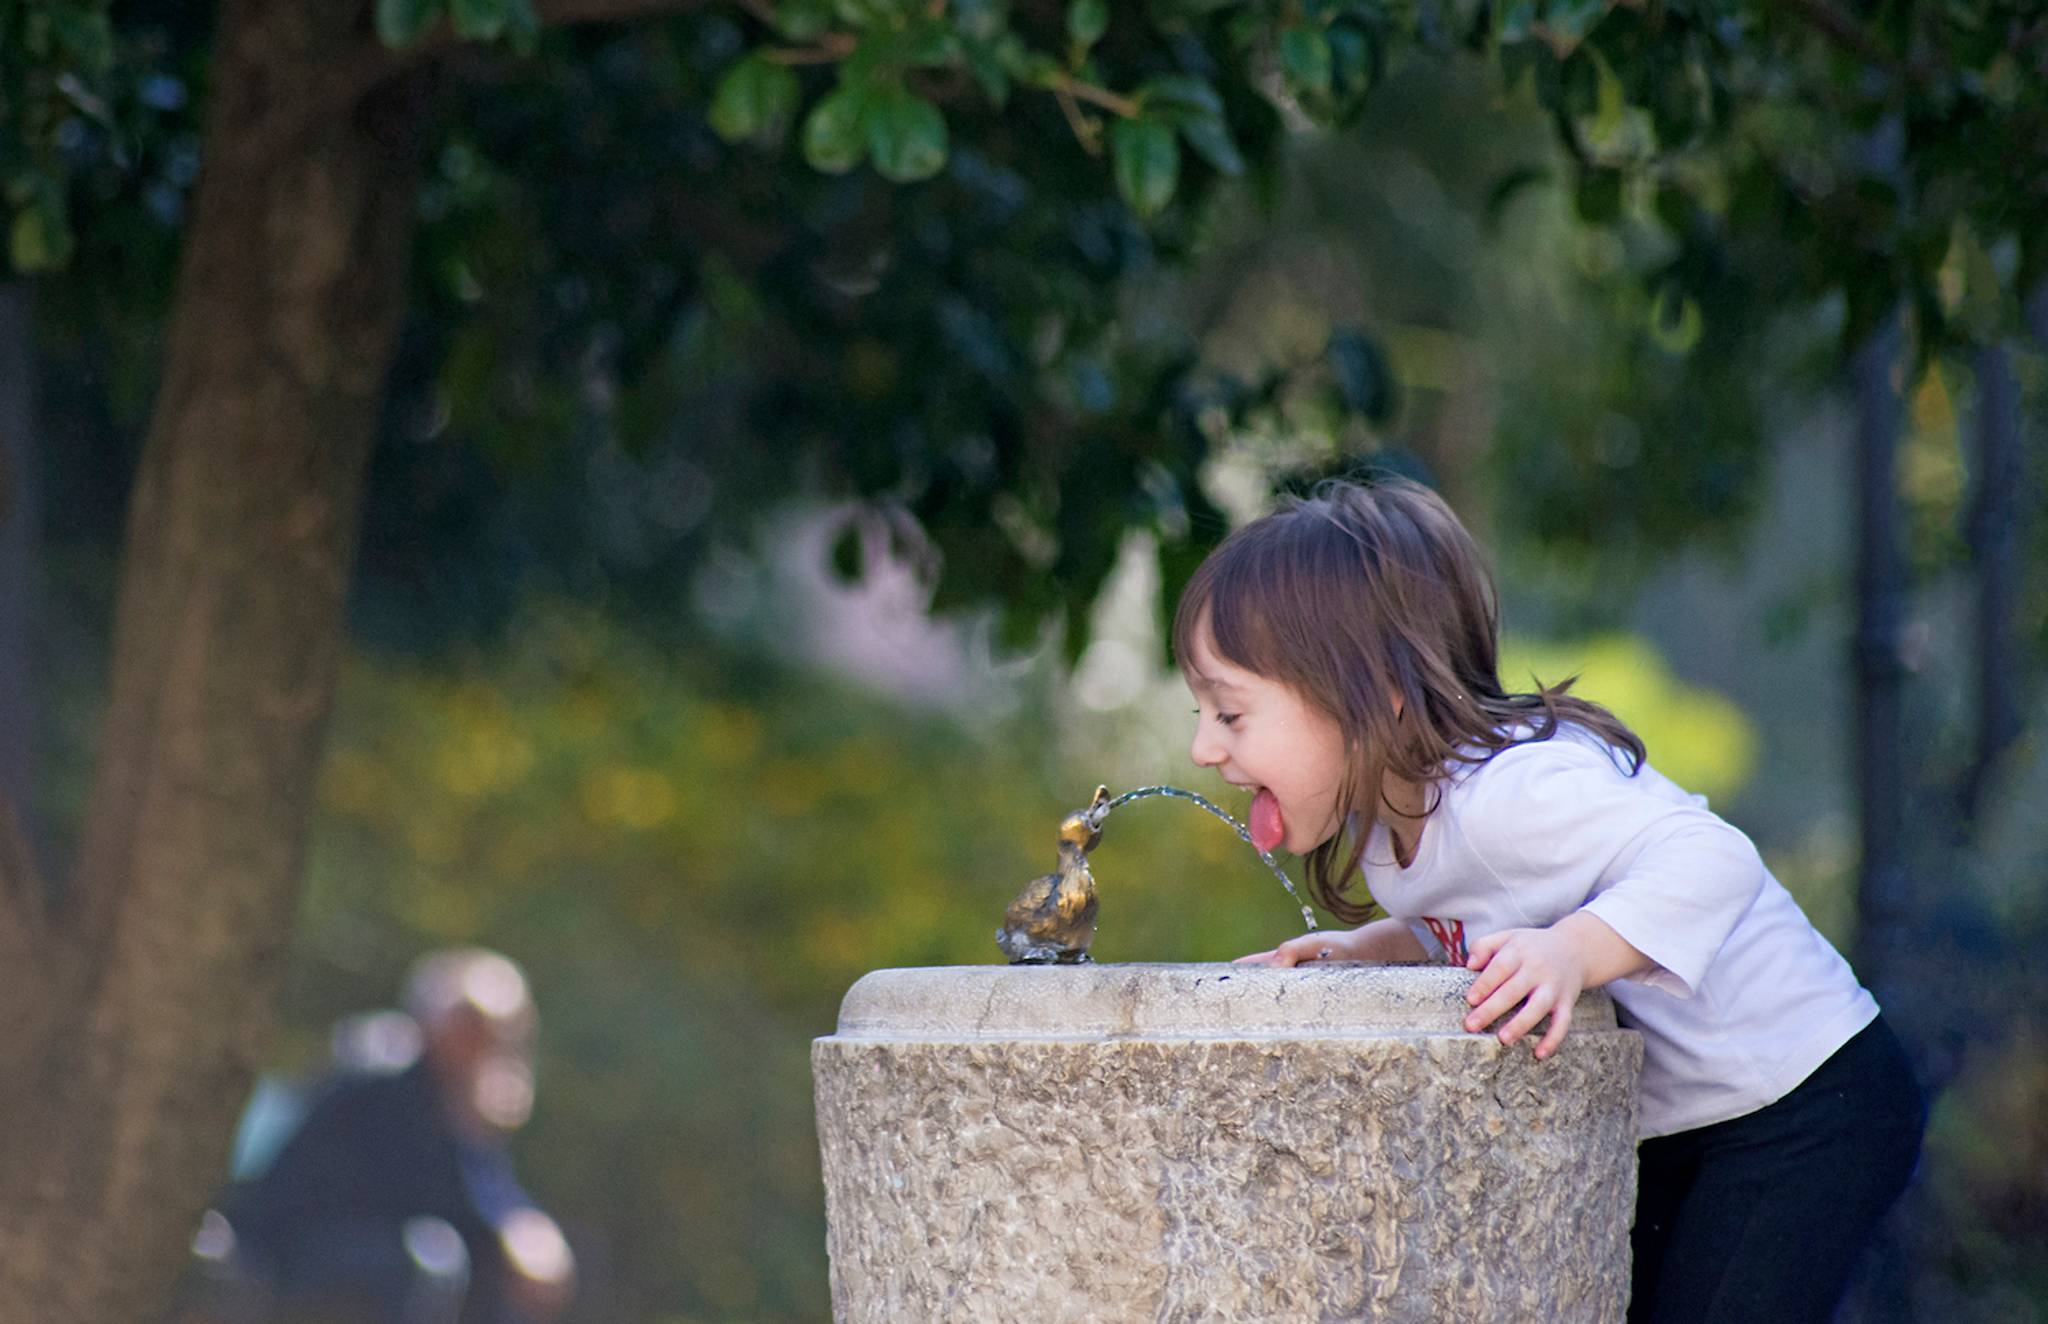 London water fountains target plastic waste problem